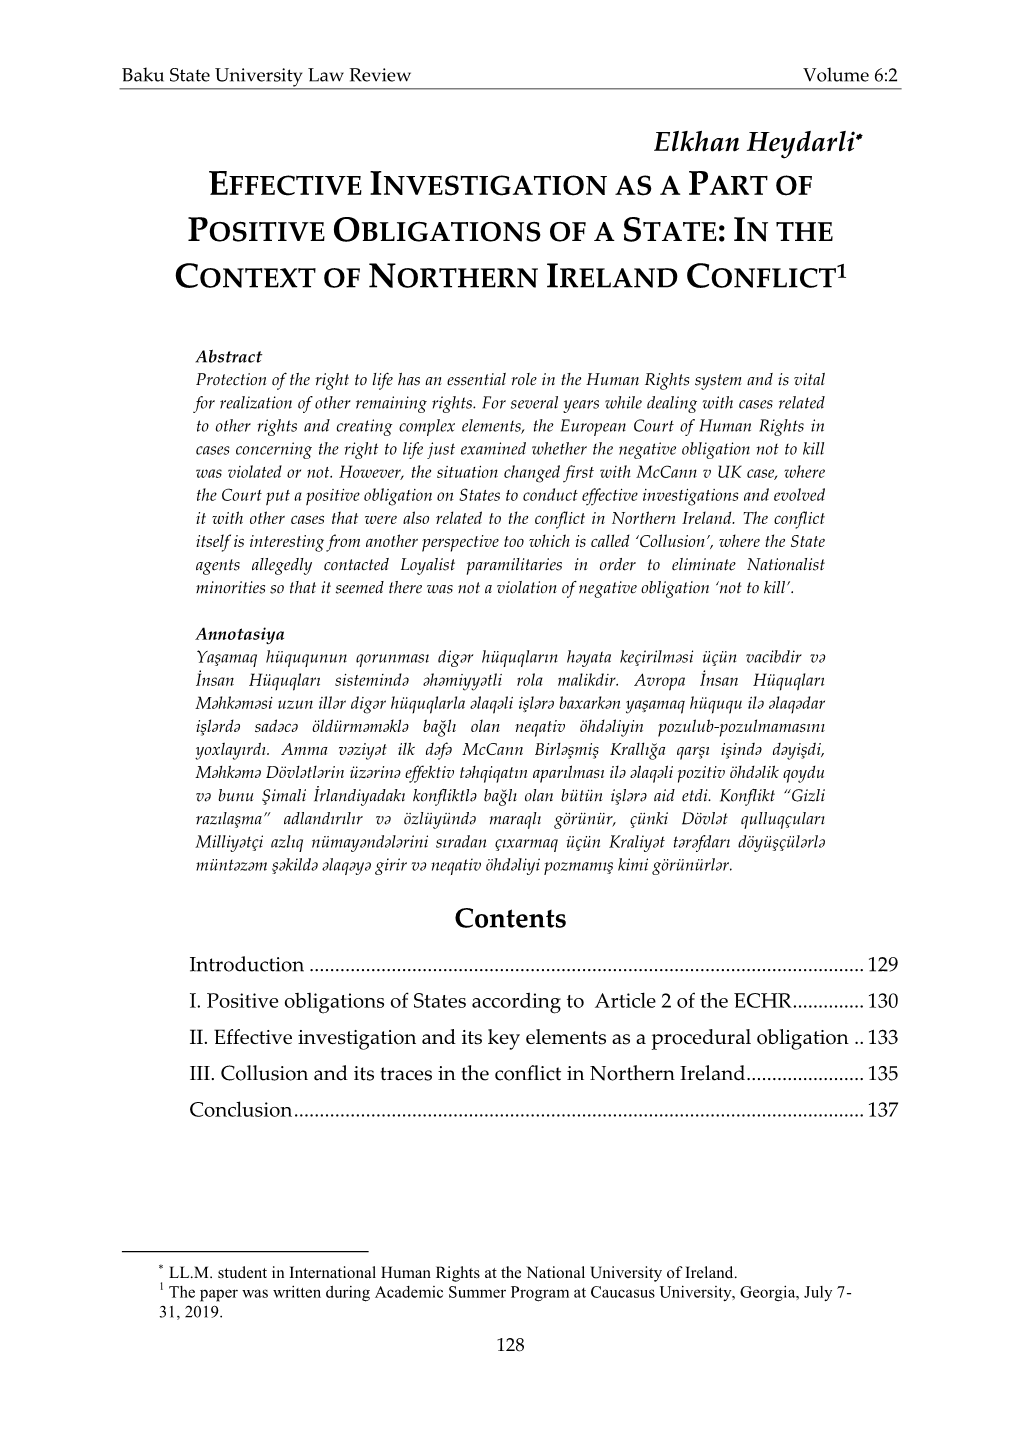 Effective Investigation As a Part of Positive Obligations of a State: in the Context of Northern Ireland Conflict1